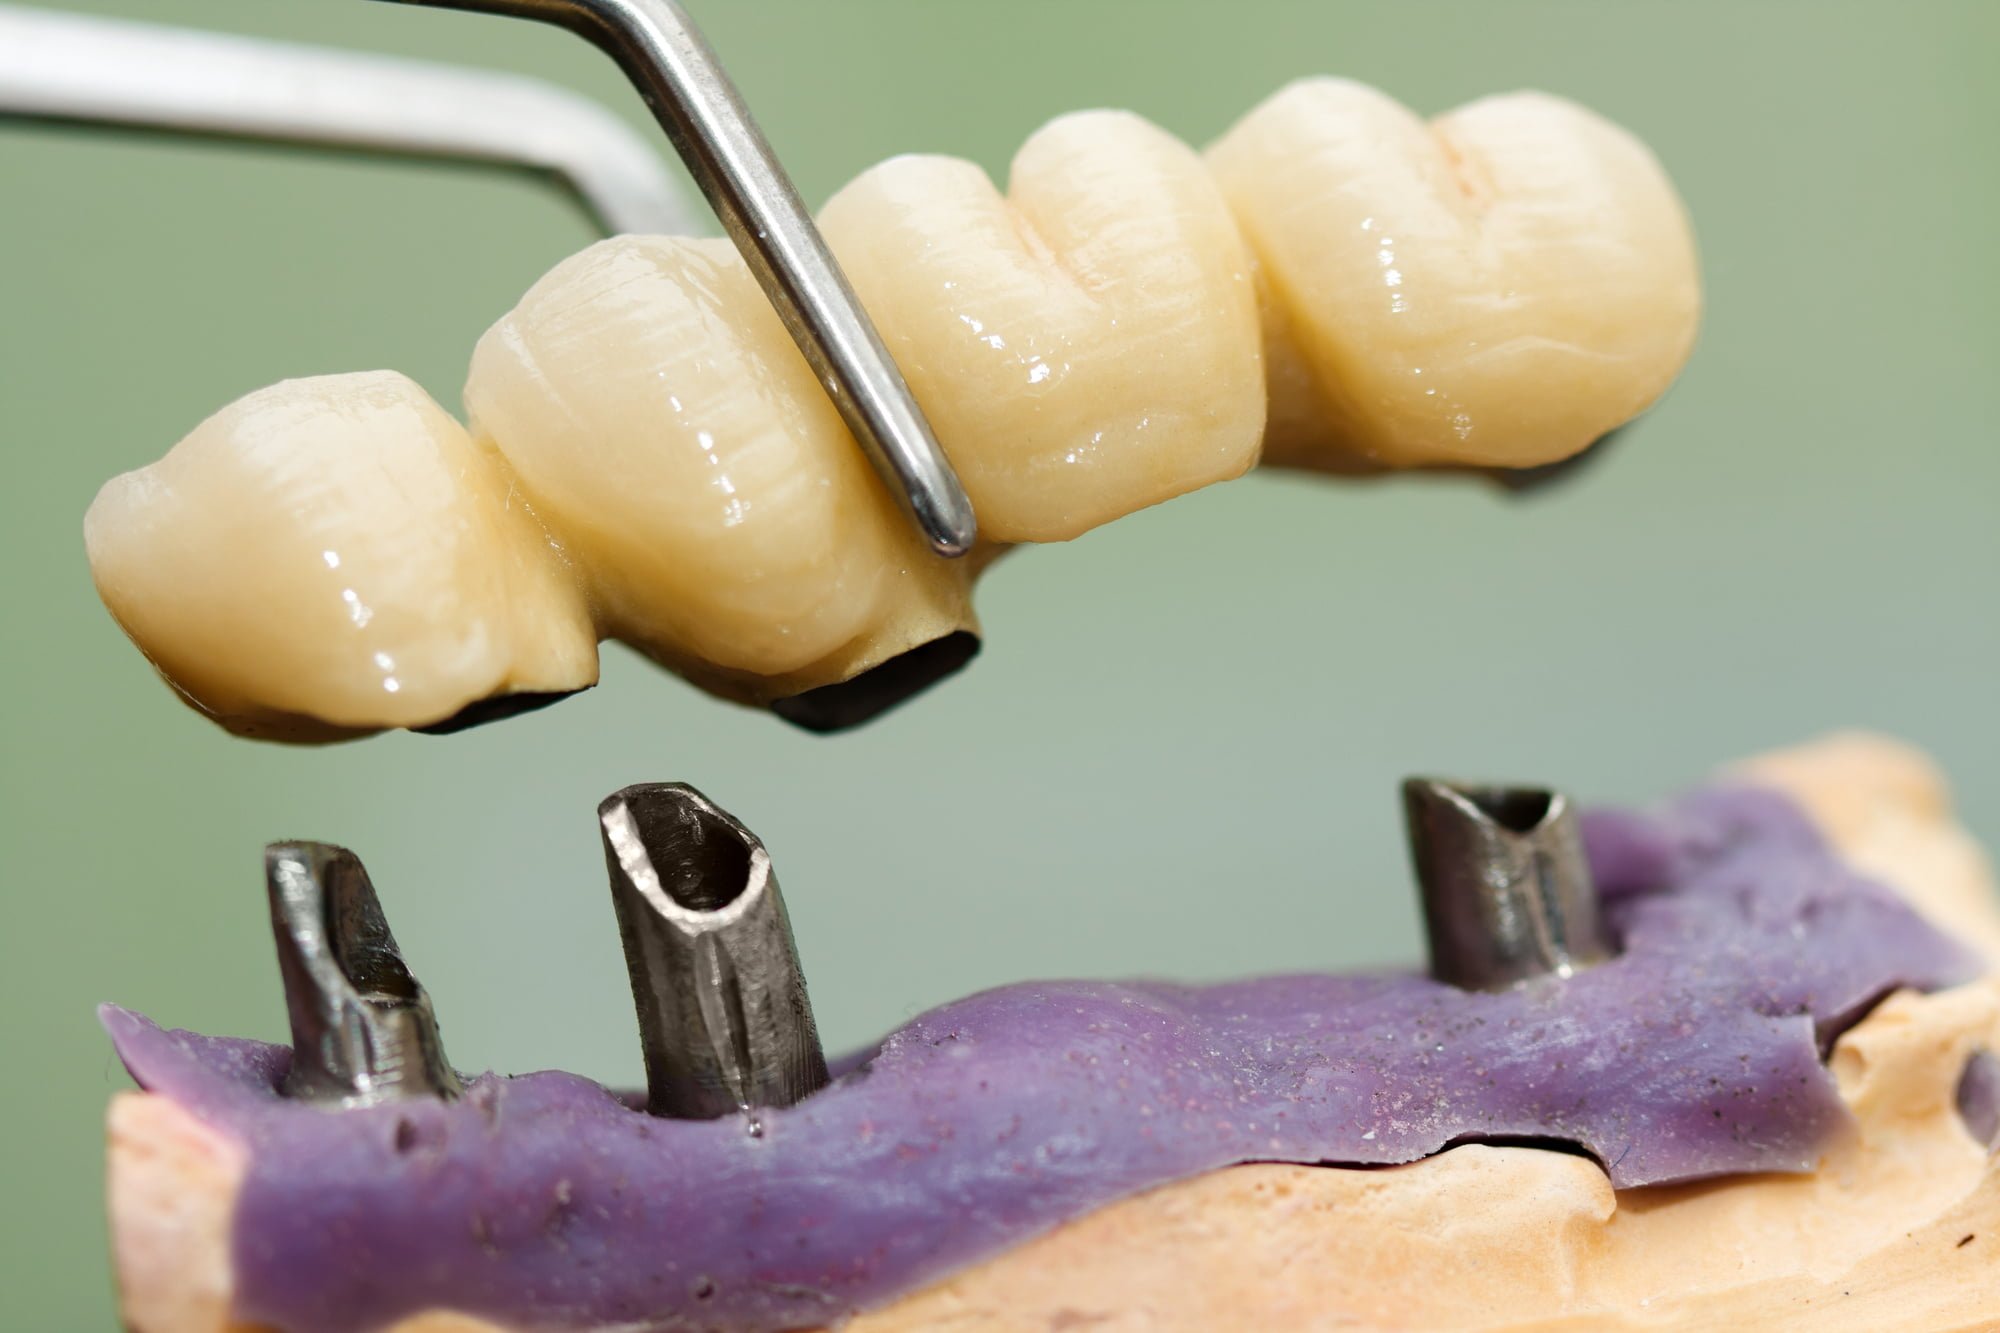 Permanent teeth implants can replace missing teeth and restore your smile. Here are five must-know things about permanent teeth implants before you get them.